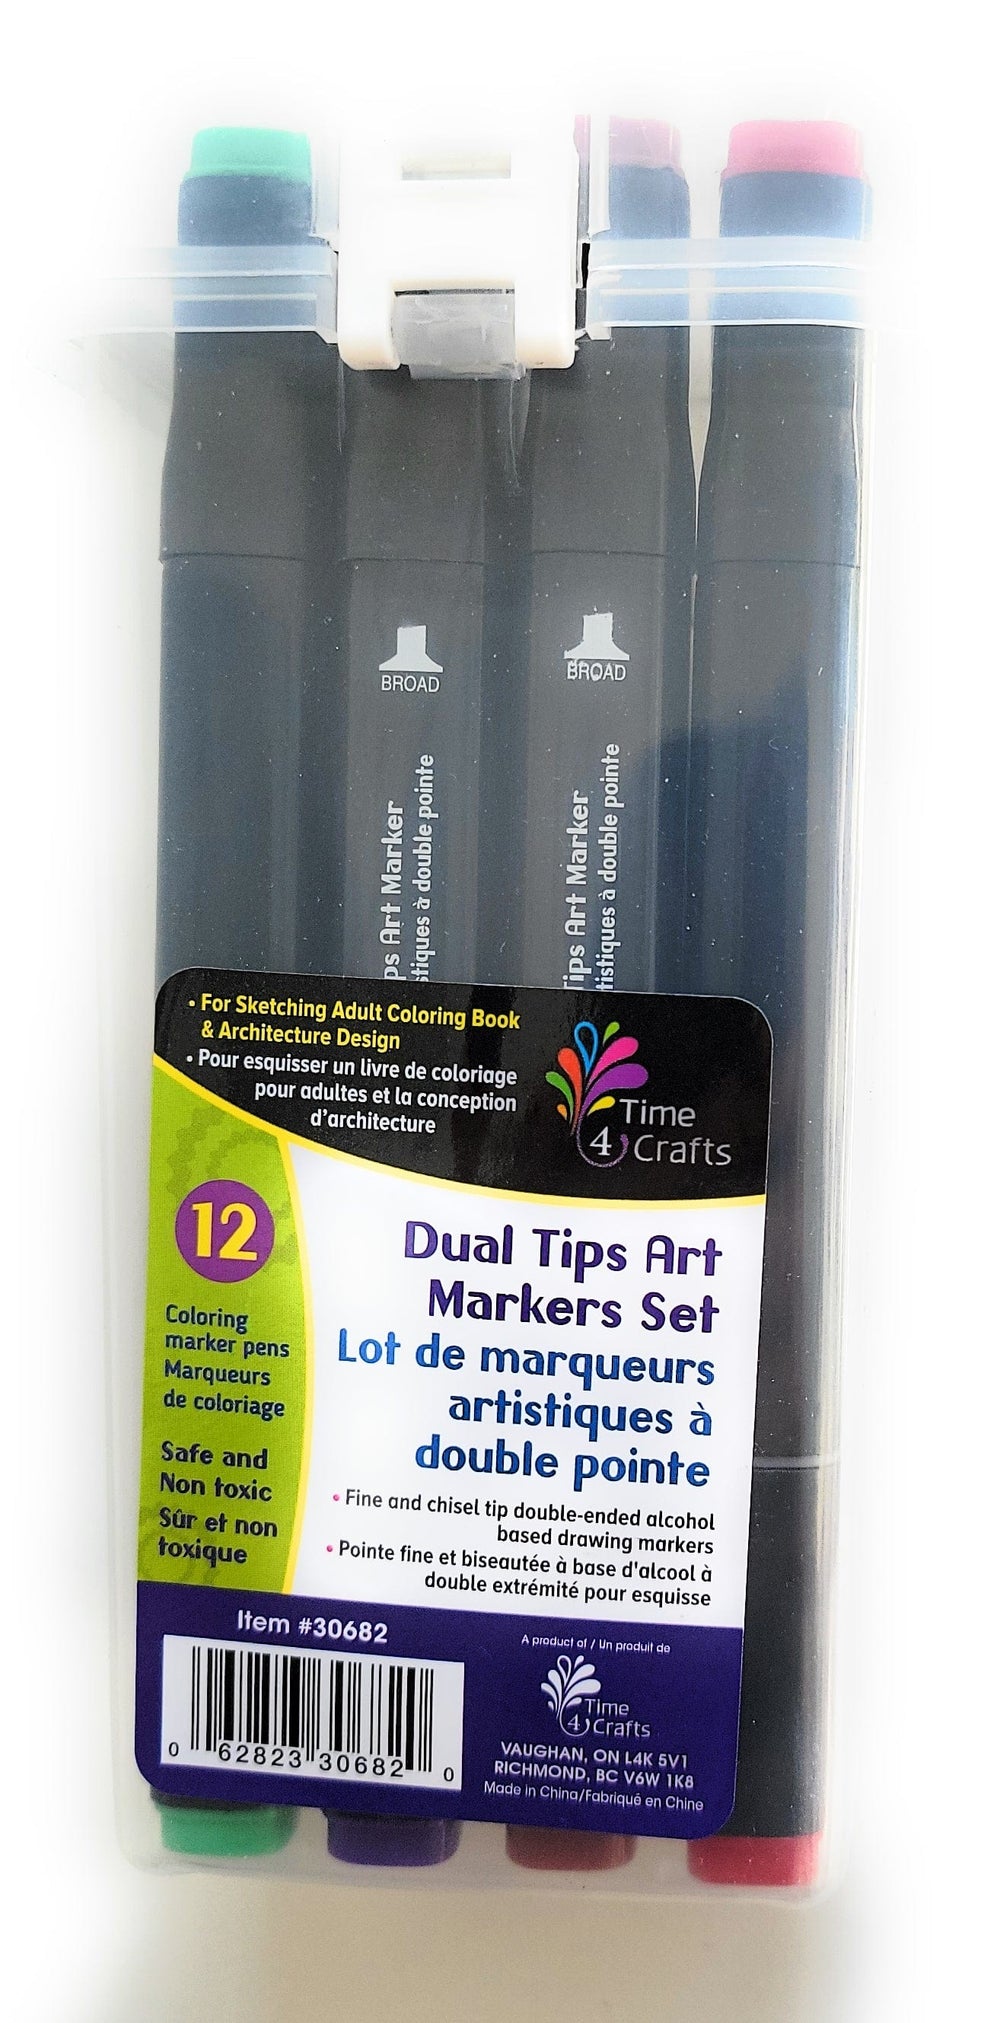 "Dual-Tip Art Markers Set for Creativity